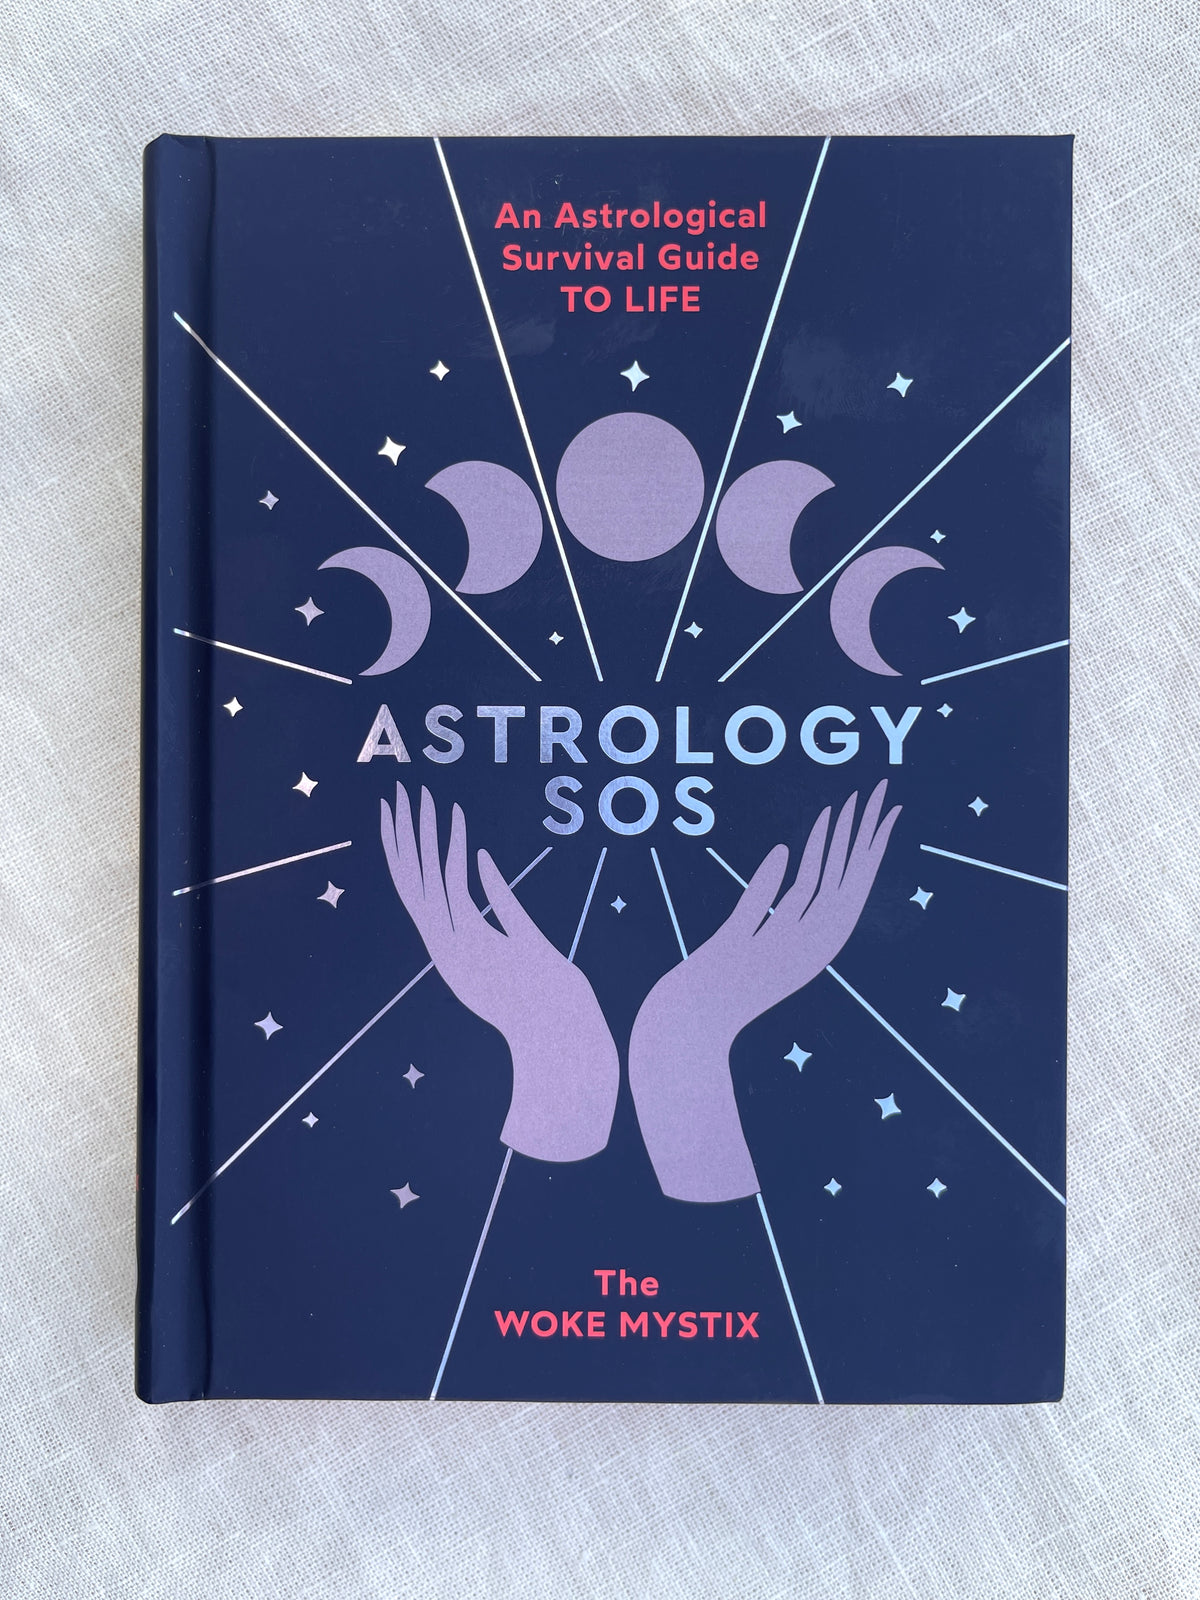 Astrology SOS book an astrological survival guide to life by woke mystix